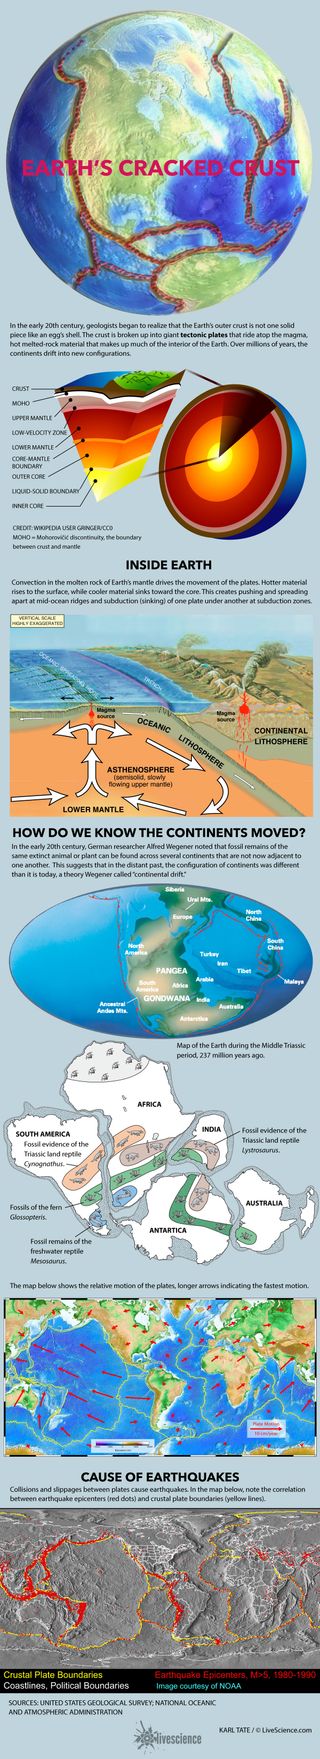 Facts about the tectonic plates.